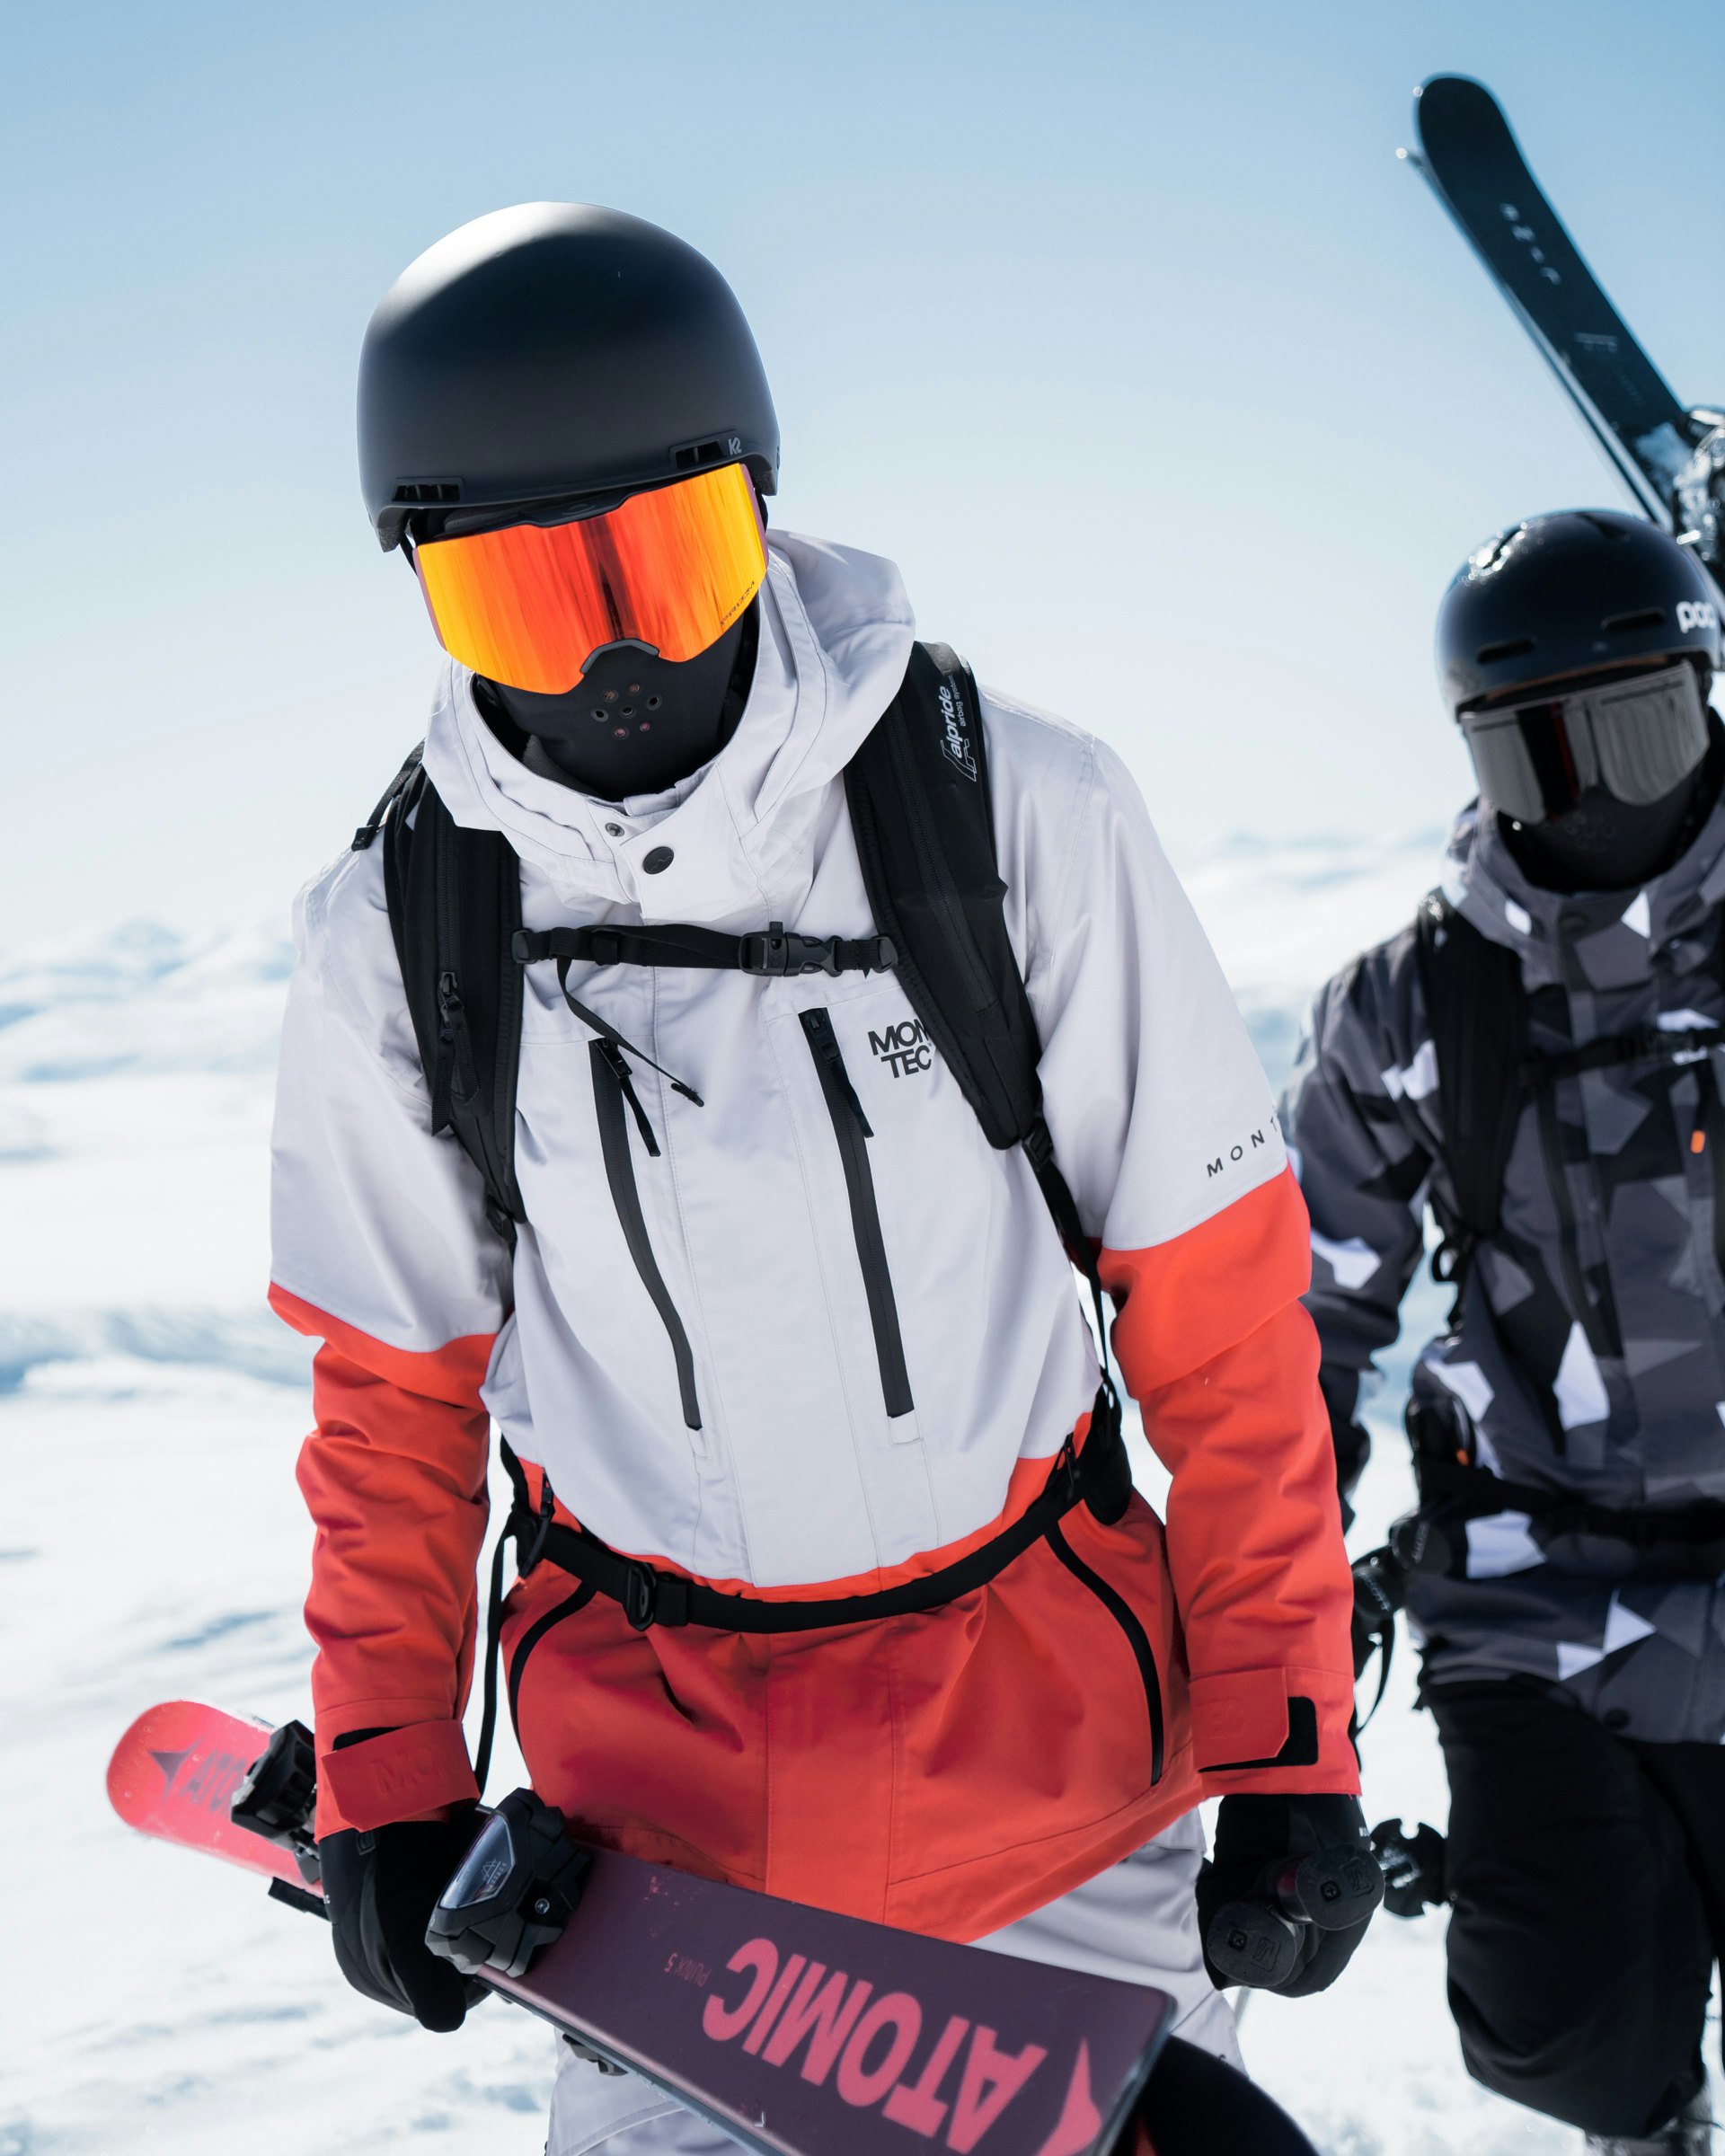 How To Fix Holes And Rips In Your Snow Gear